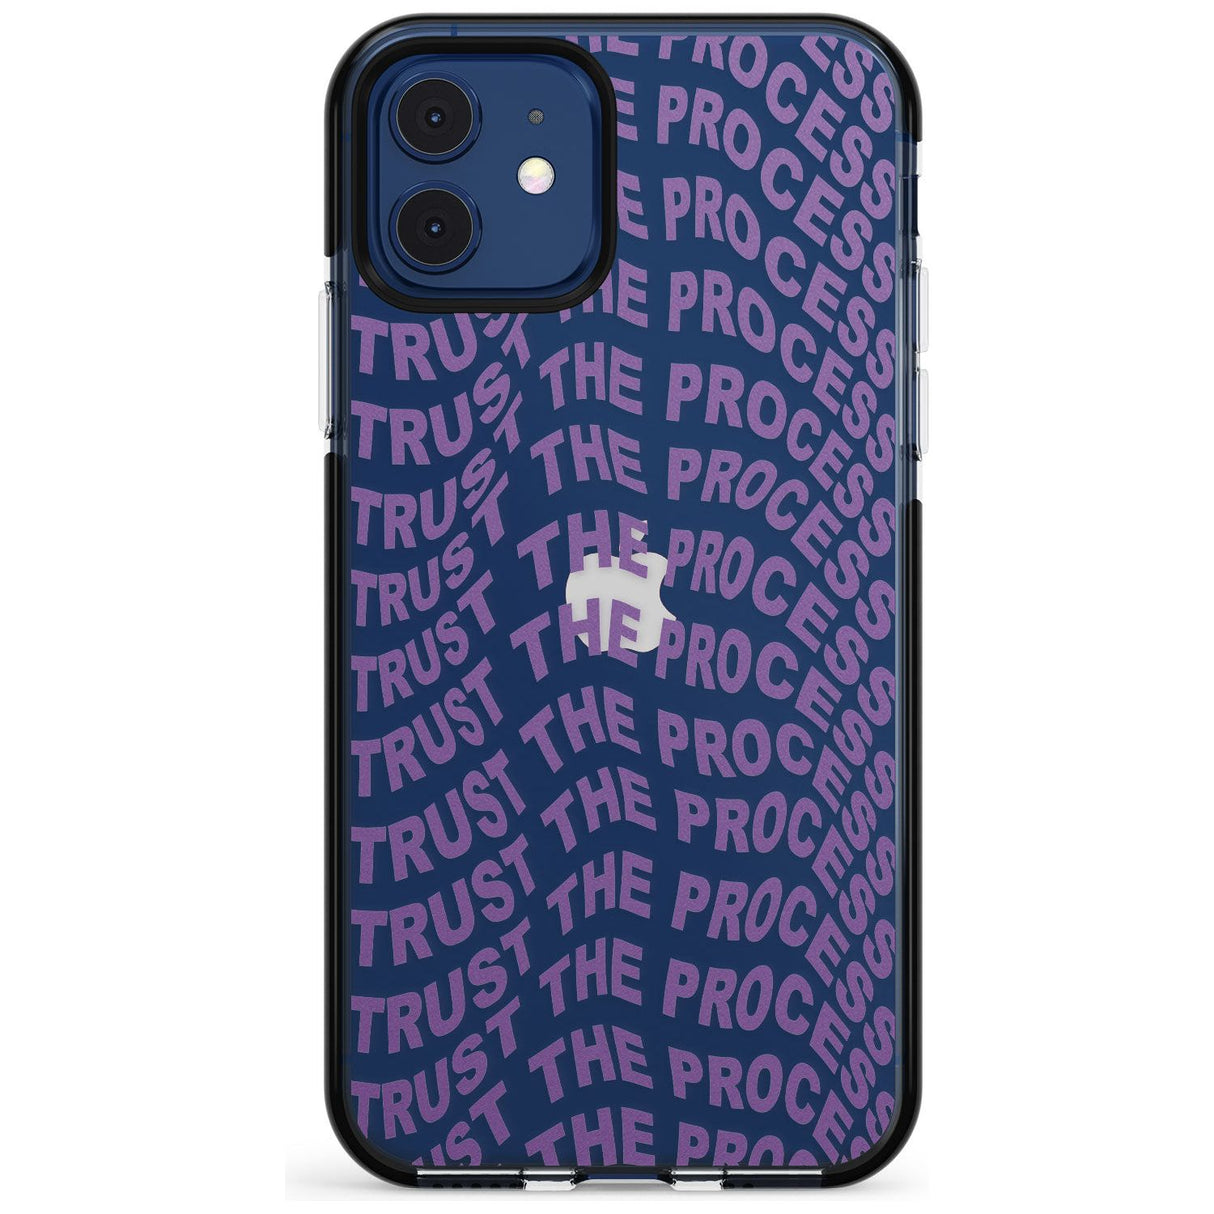 Trust The Process Black Impact Phone Case for iPhone 11 Pro Max